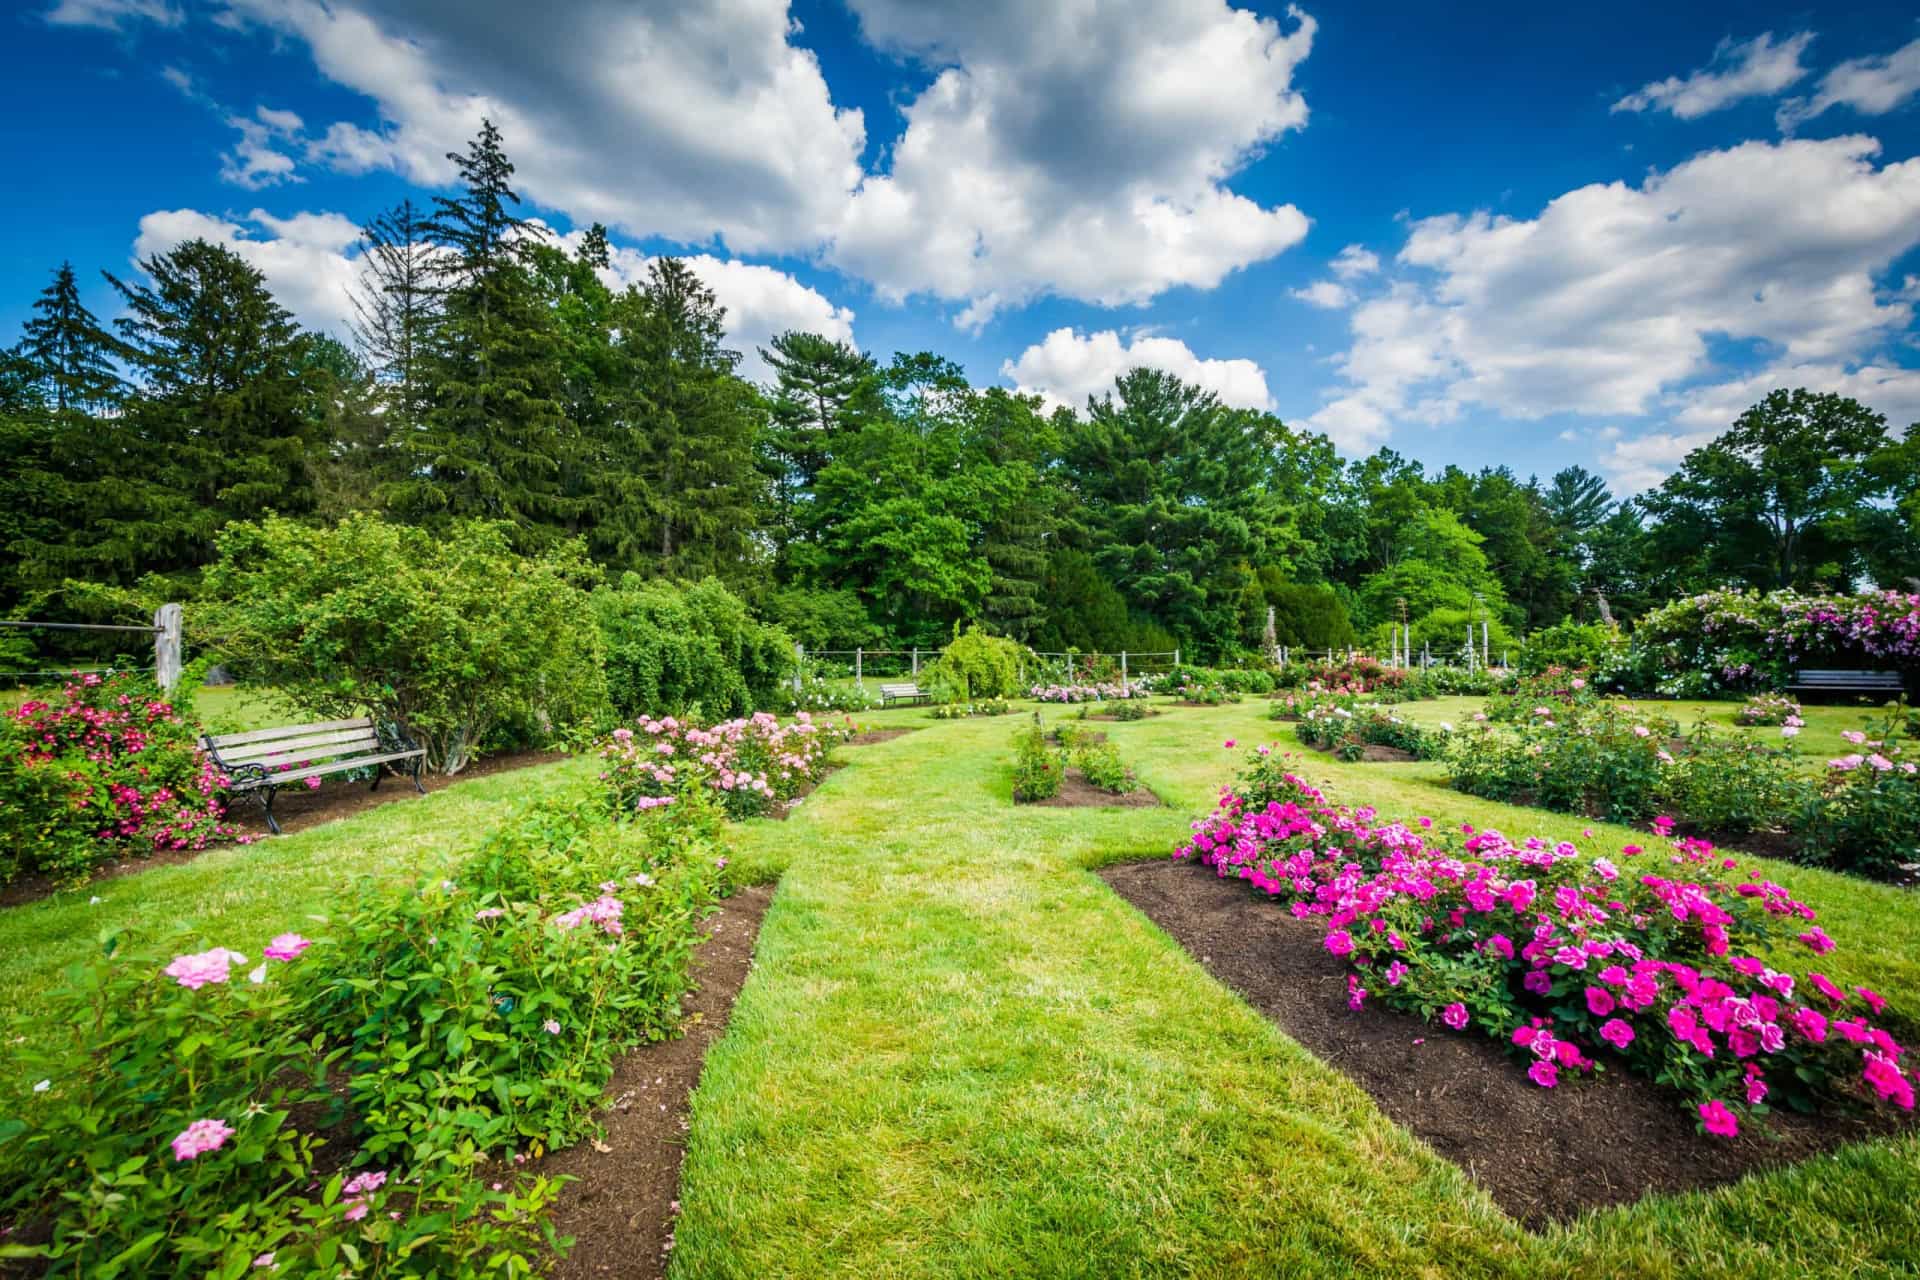 <p>Over 100 acres of formal gardens sown with more than 15,000 plants and an incredible 800 varieties of roses is why America's oldest public rose garden, opened in 1897, is also one of the country's largest.</p><p>You may also like: <a href="https://www.starsinsider.com/n/322347?utm_source=msn.com&utm_medium=display&utm_campaign=referral_description&utm_content=513982en-us">Celebrities who quit veganism</a></p>